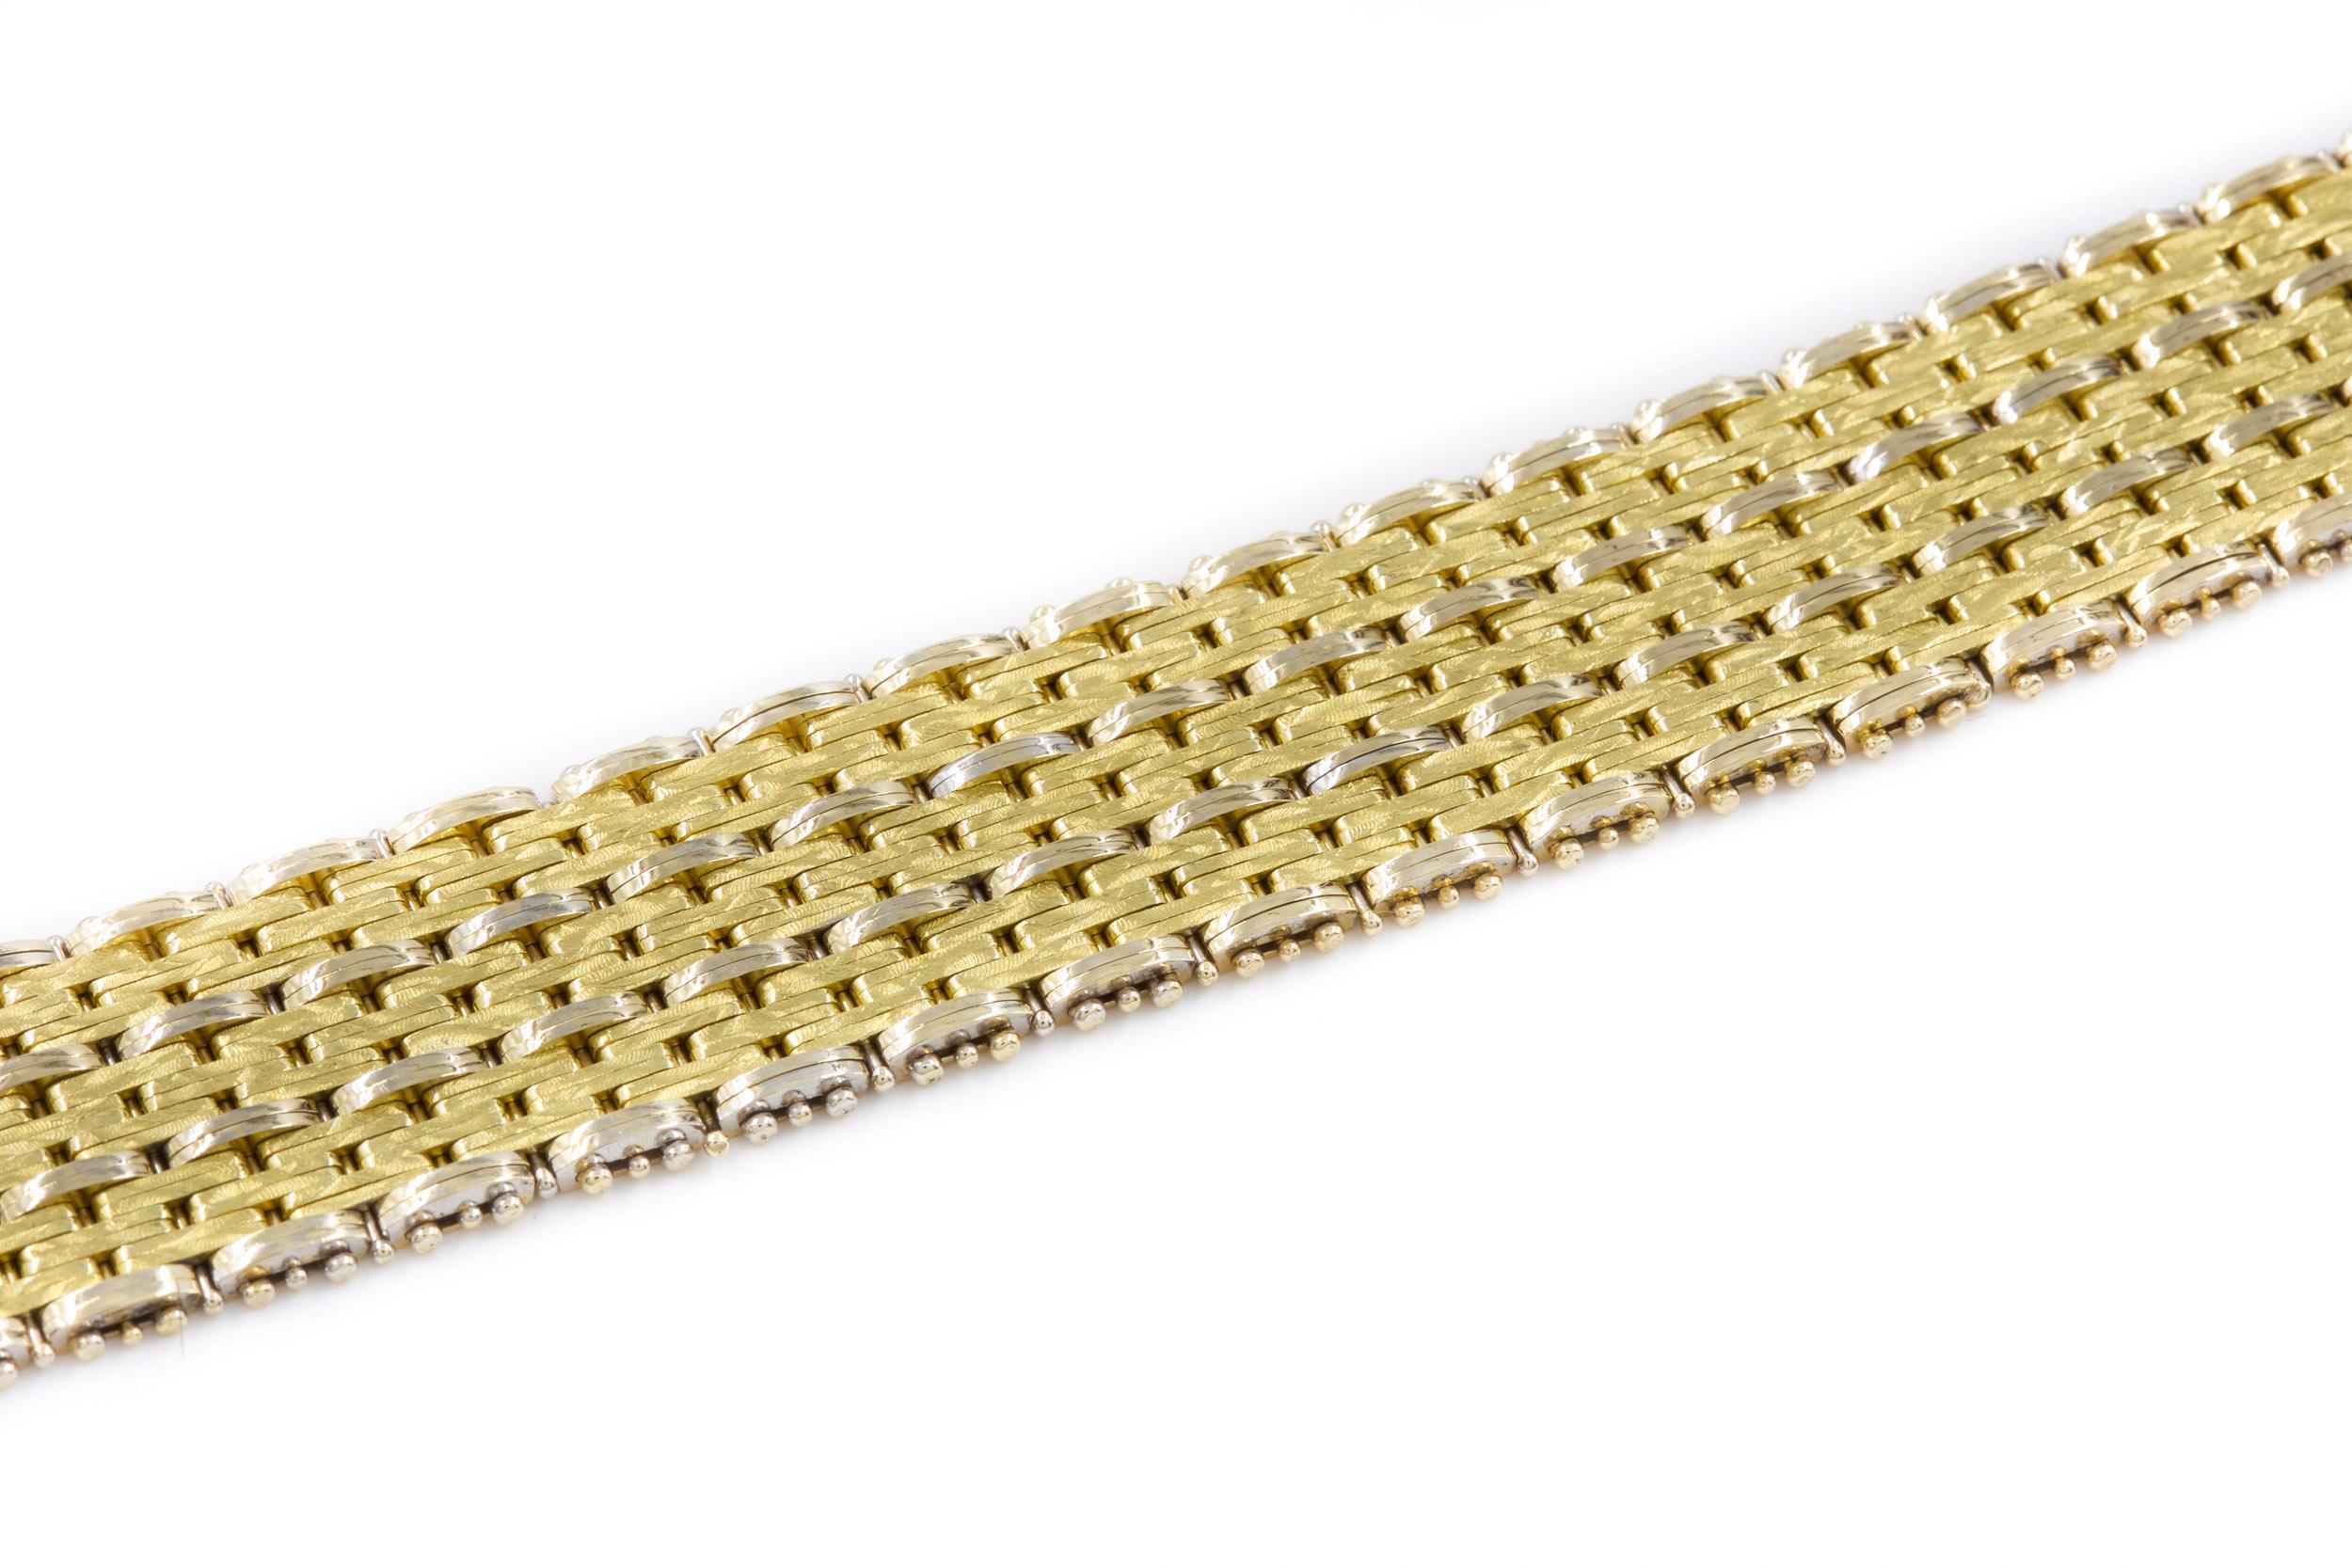 BEAUTIFULLY TEXTURED AND WOVEN 14K BICOLOR GOLD STRAP BRACELET
7 1/2